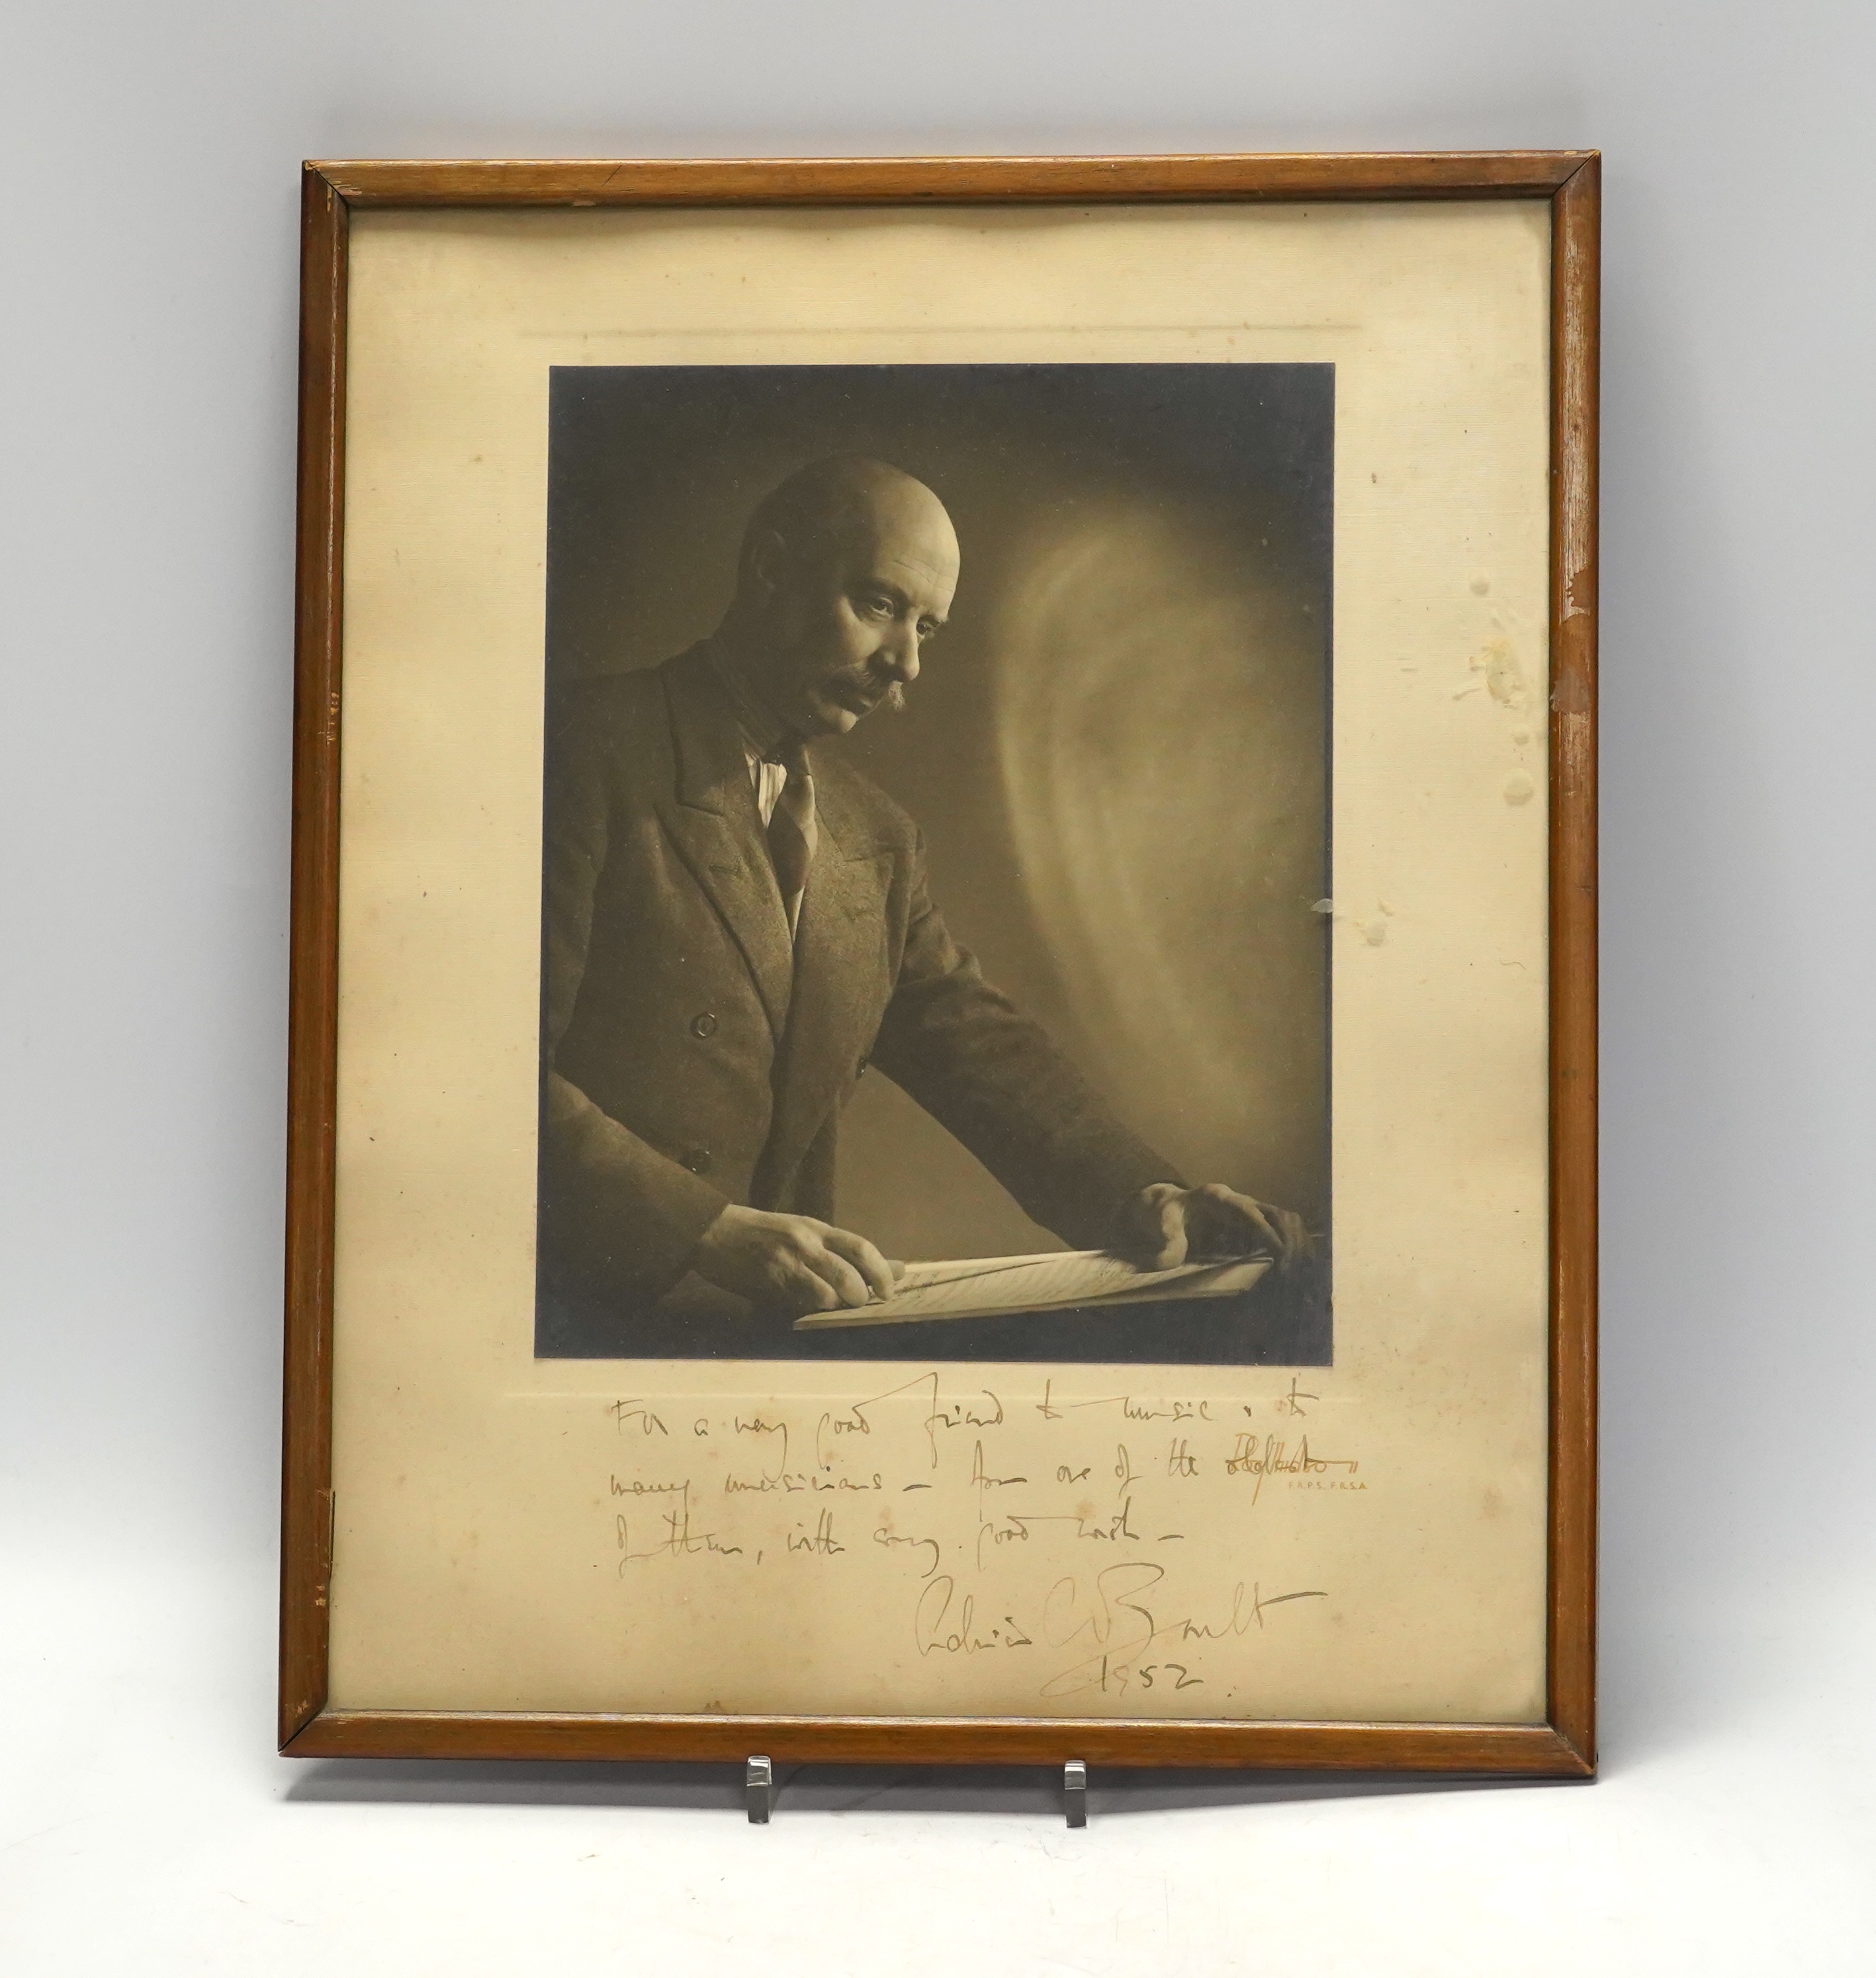 A signed photograph of the conductor Sir Adrian Boult with dedication dated 1952, frame 39.5 x 32cm